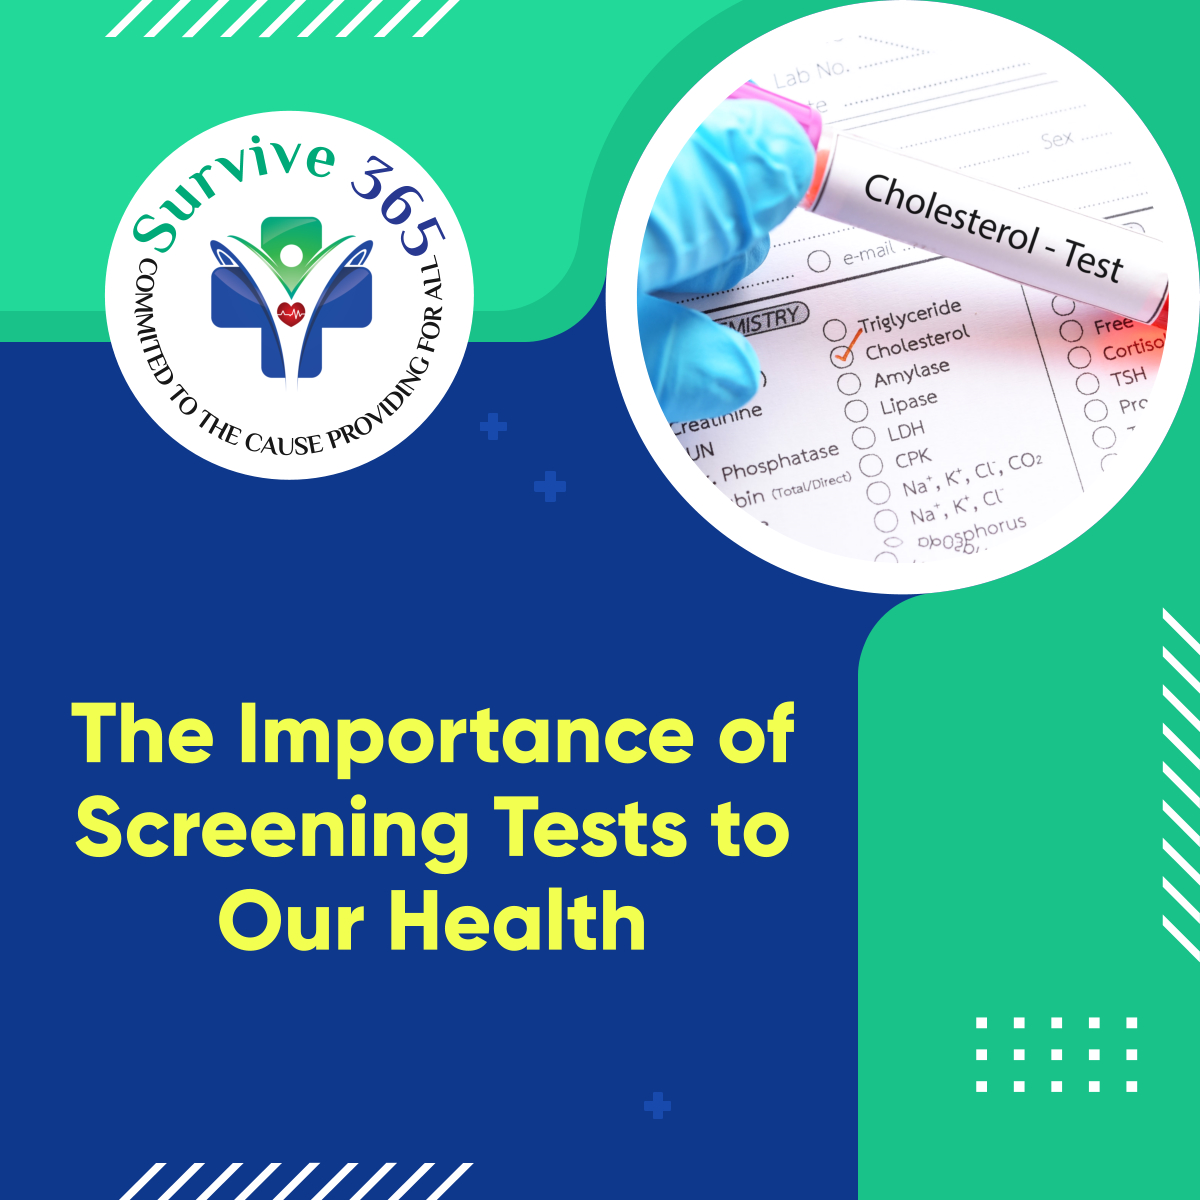 A screening test is done to identify potential health disorders or diseases in people with no symptoms of any disease.

Read more: facebook.com/survive365heal…

#HealthcareStaffing #OaklandParkFL #ScreeningTests